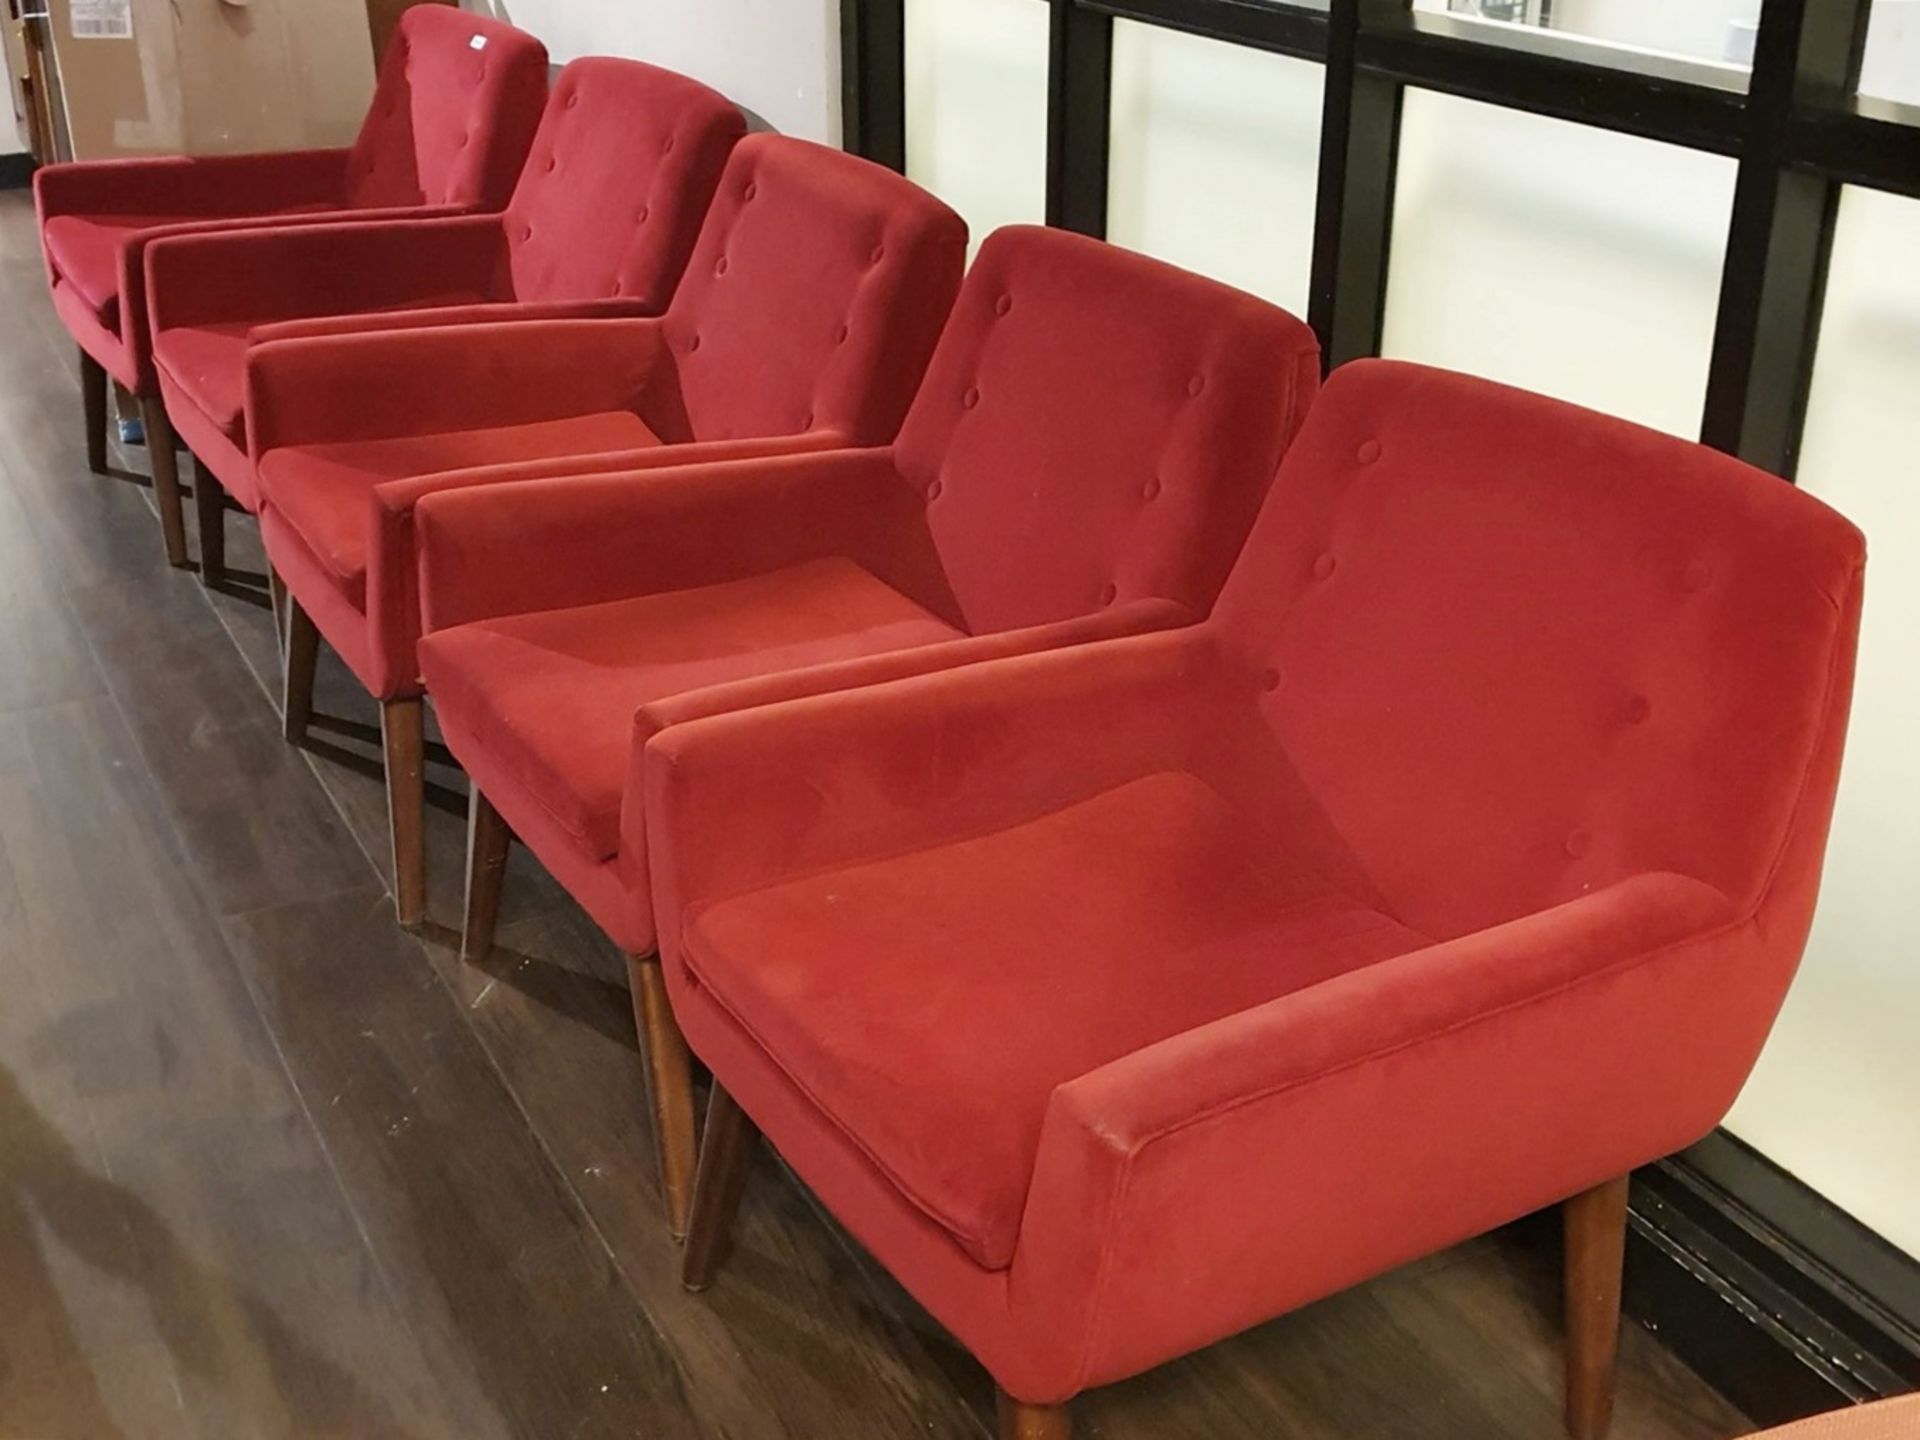 5 x Retro Style Armchairs in Red Fabric - H80/45 x W68 x D70 cms - Ref PA136 - CL463 - Location: - Image 3 of 3